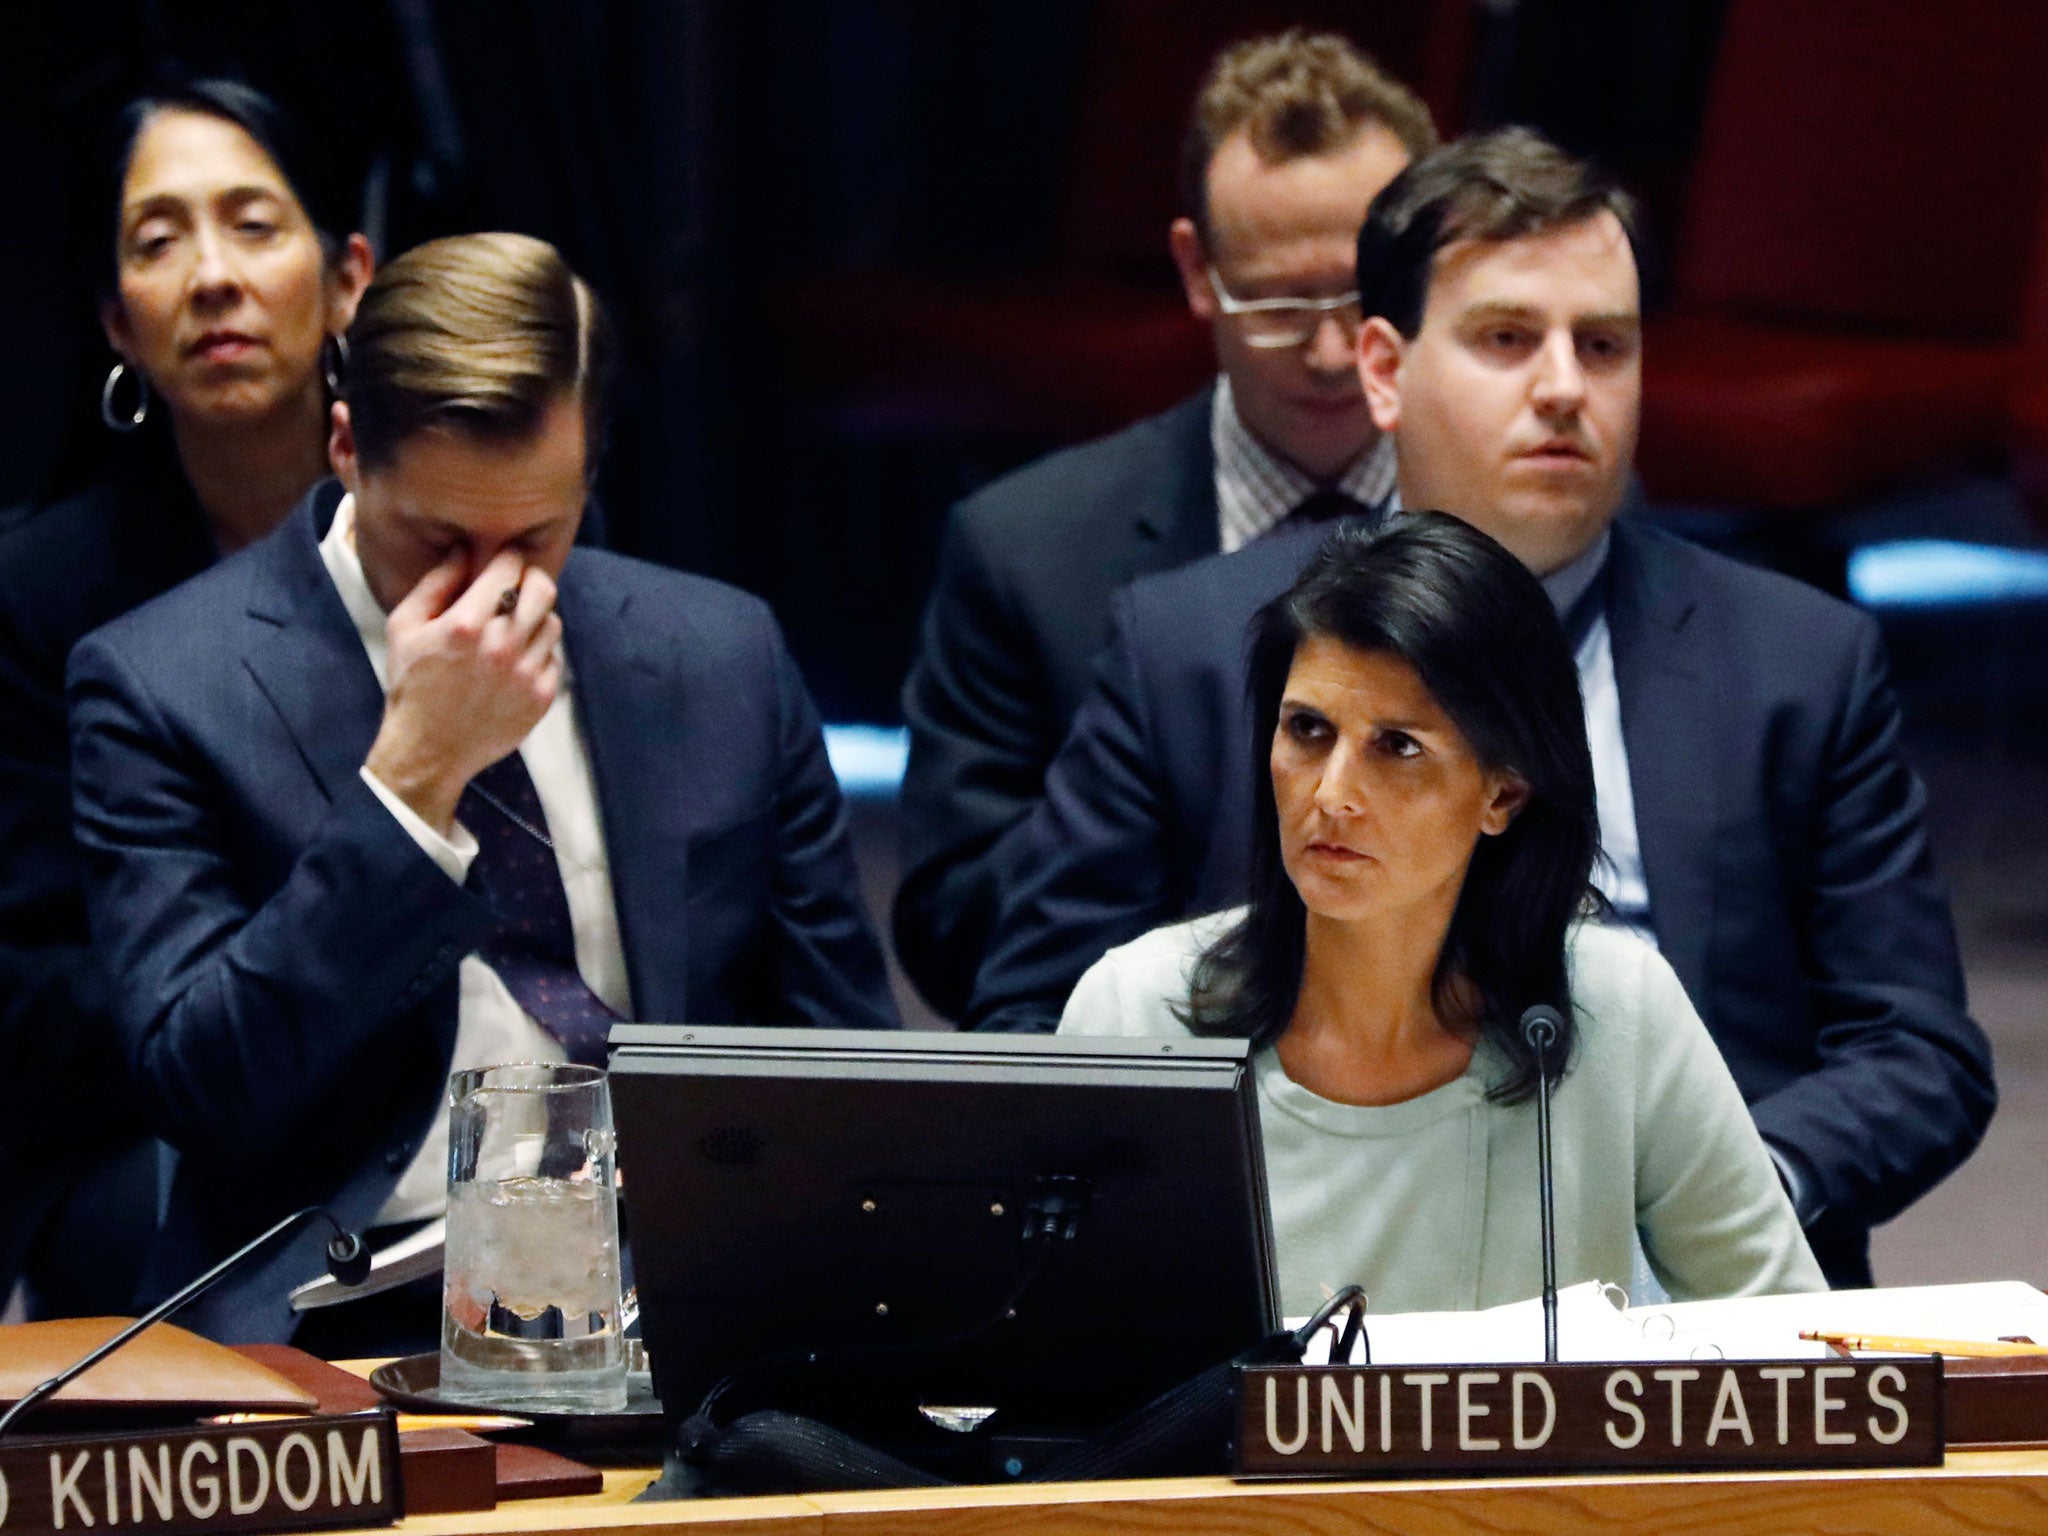 The new US Ambassador to the United Nations, Nikki Haley, waits to address the Security Council on the situation in Ukraine